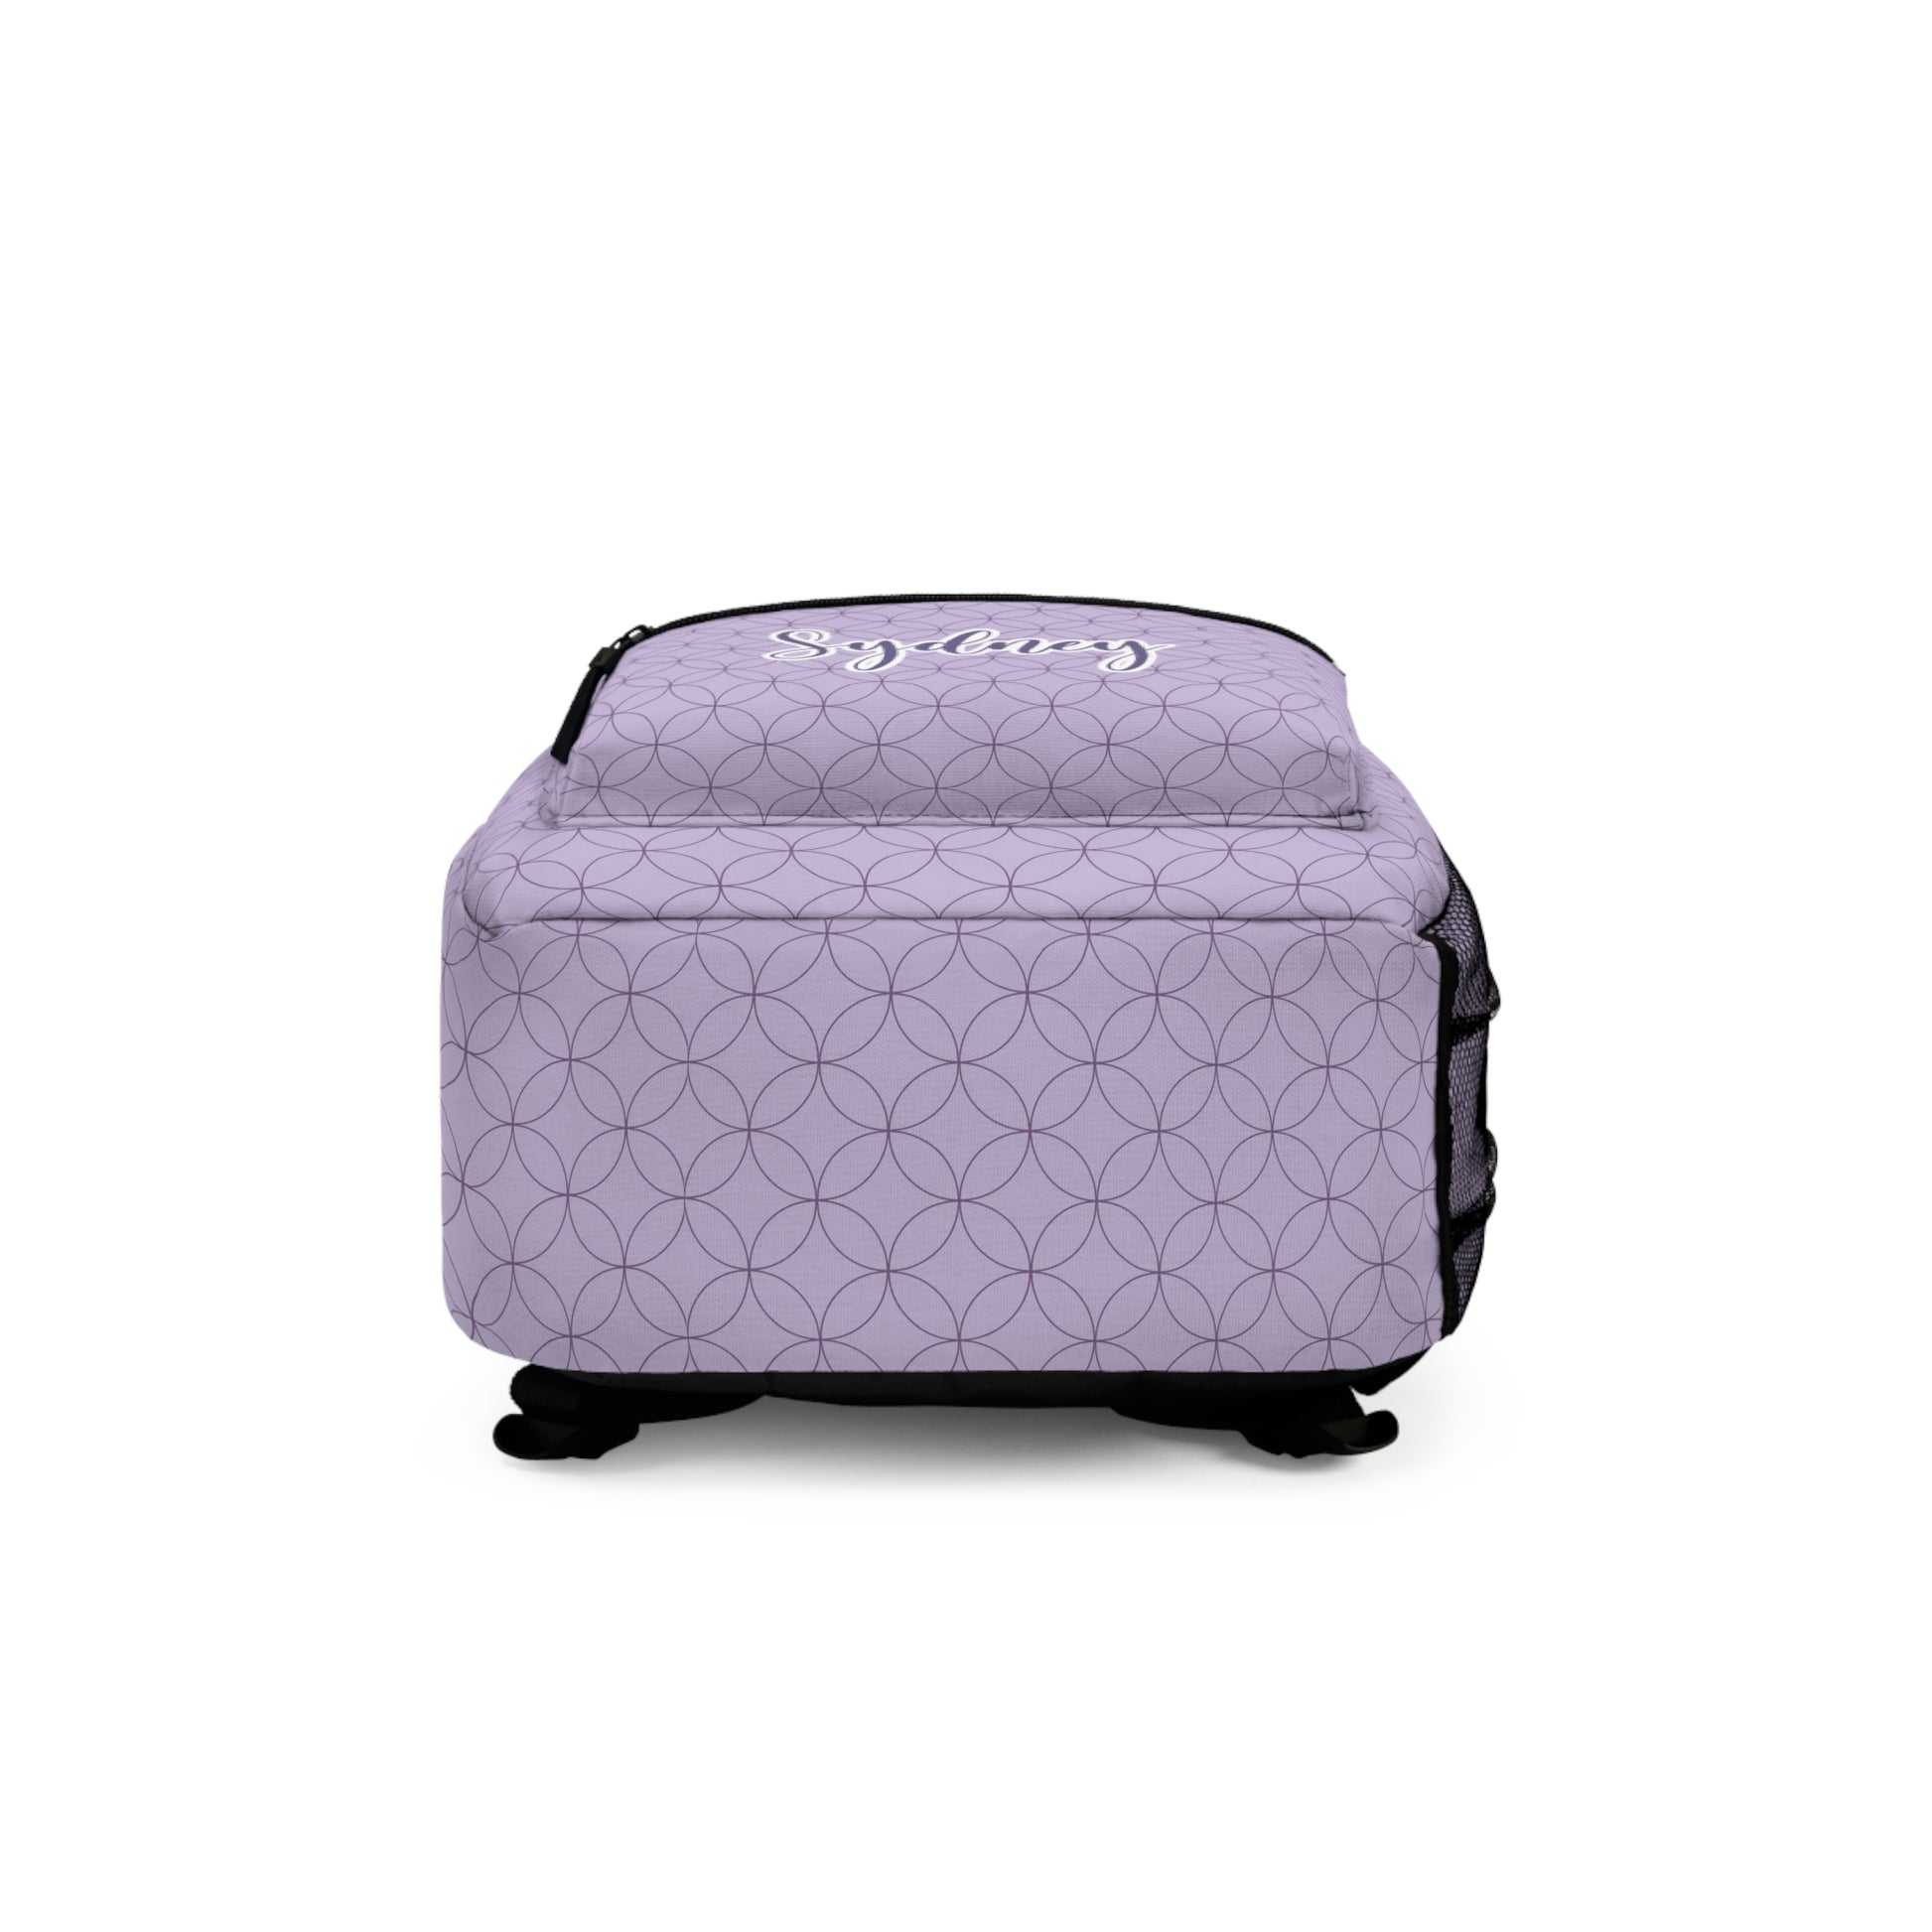 bottom view of the women's purple backpack showing the large size